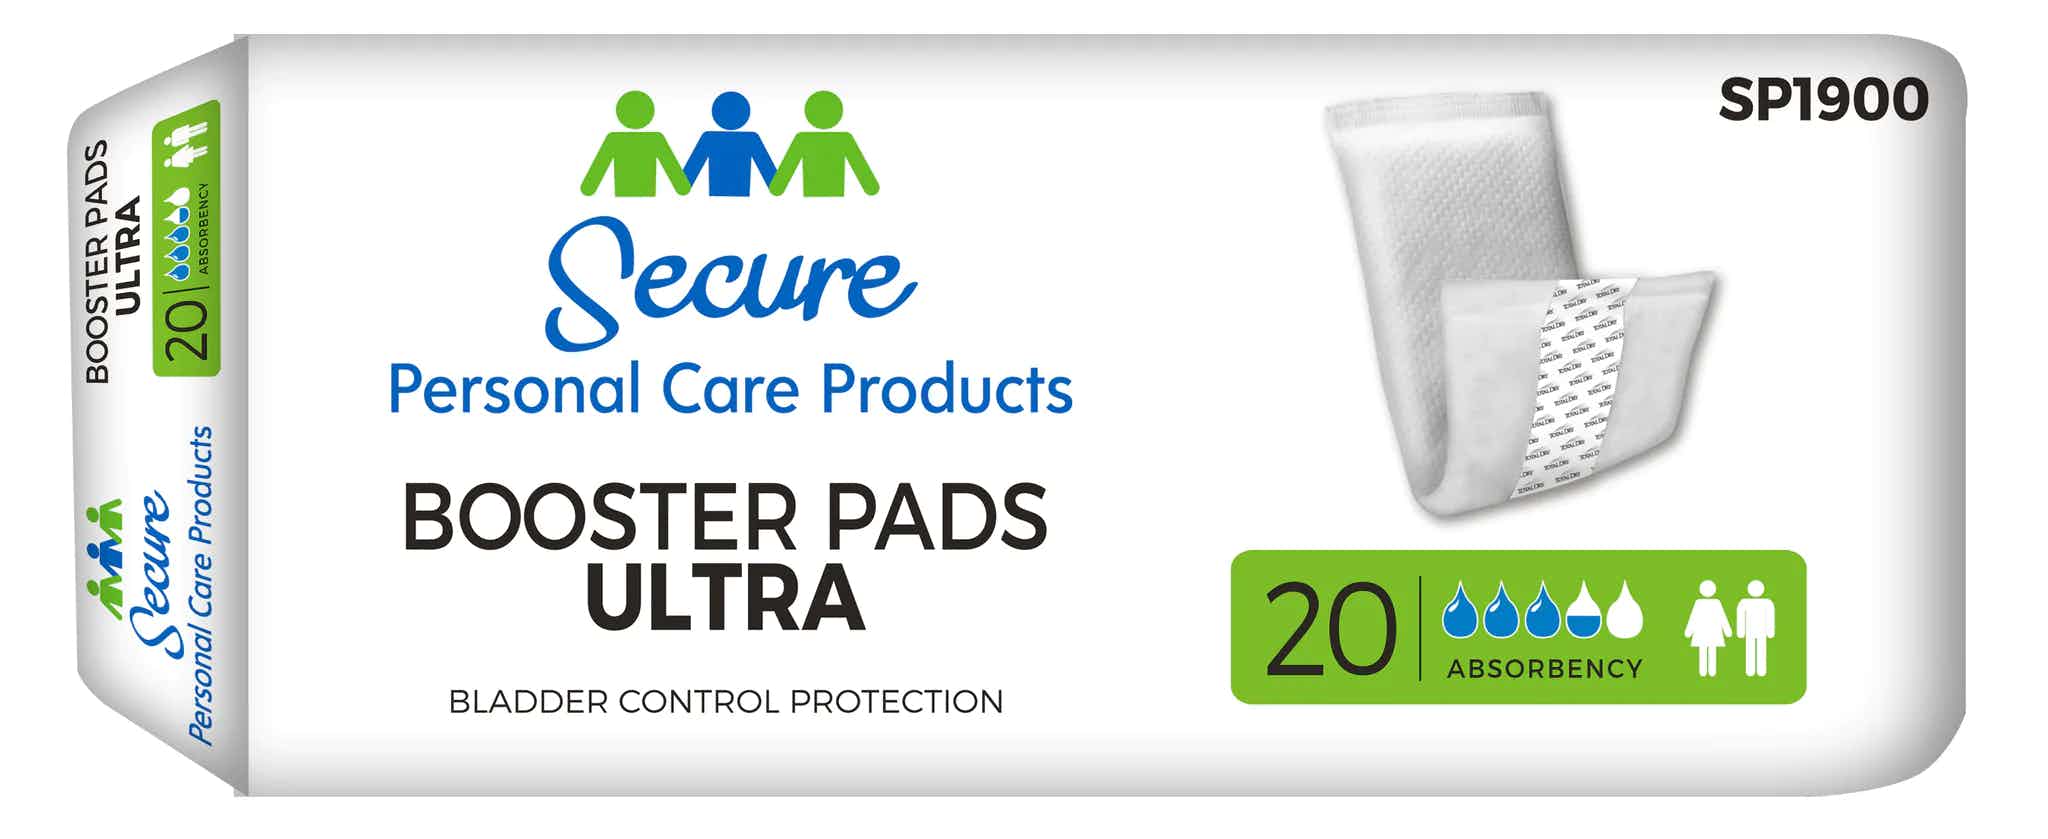 Secure Personal Care Products Booster Pads Ultra, Extra Absorbency